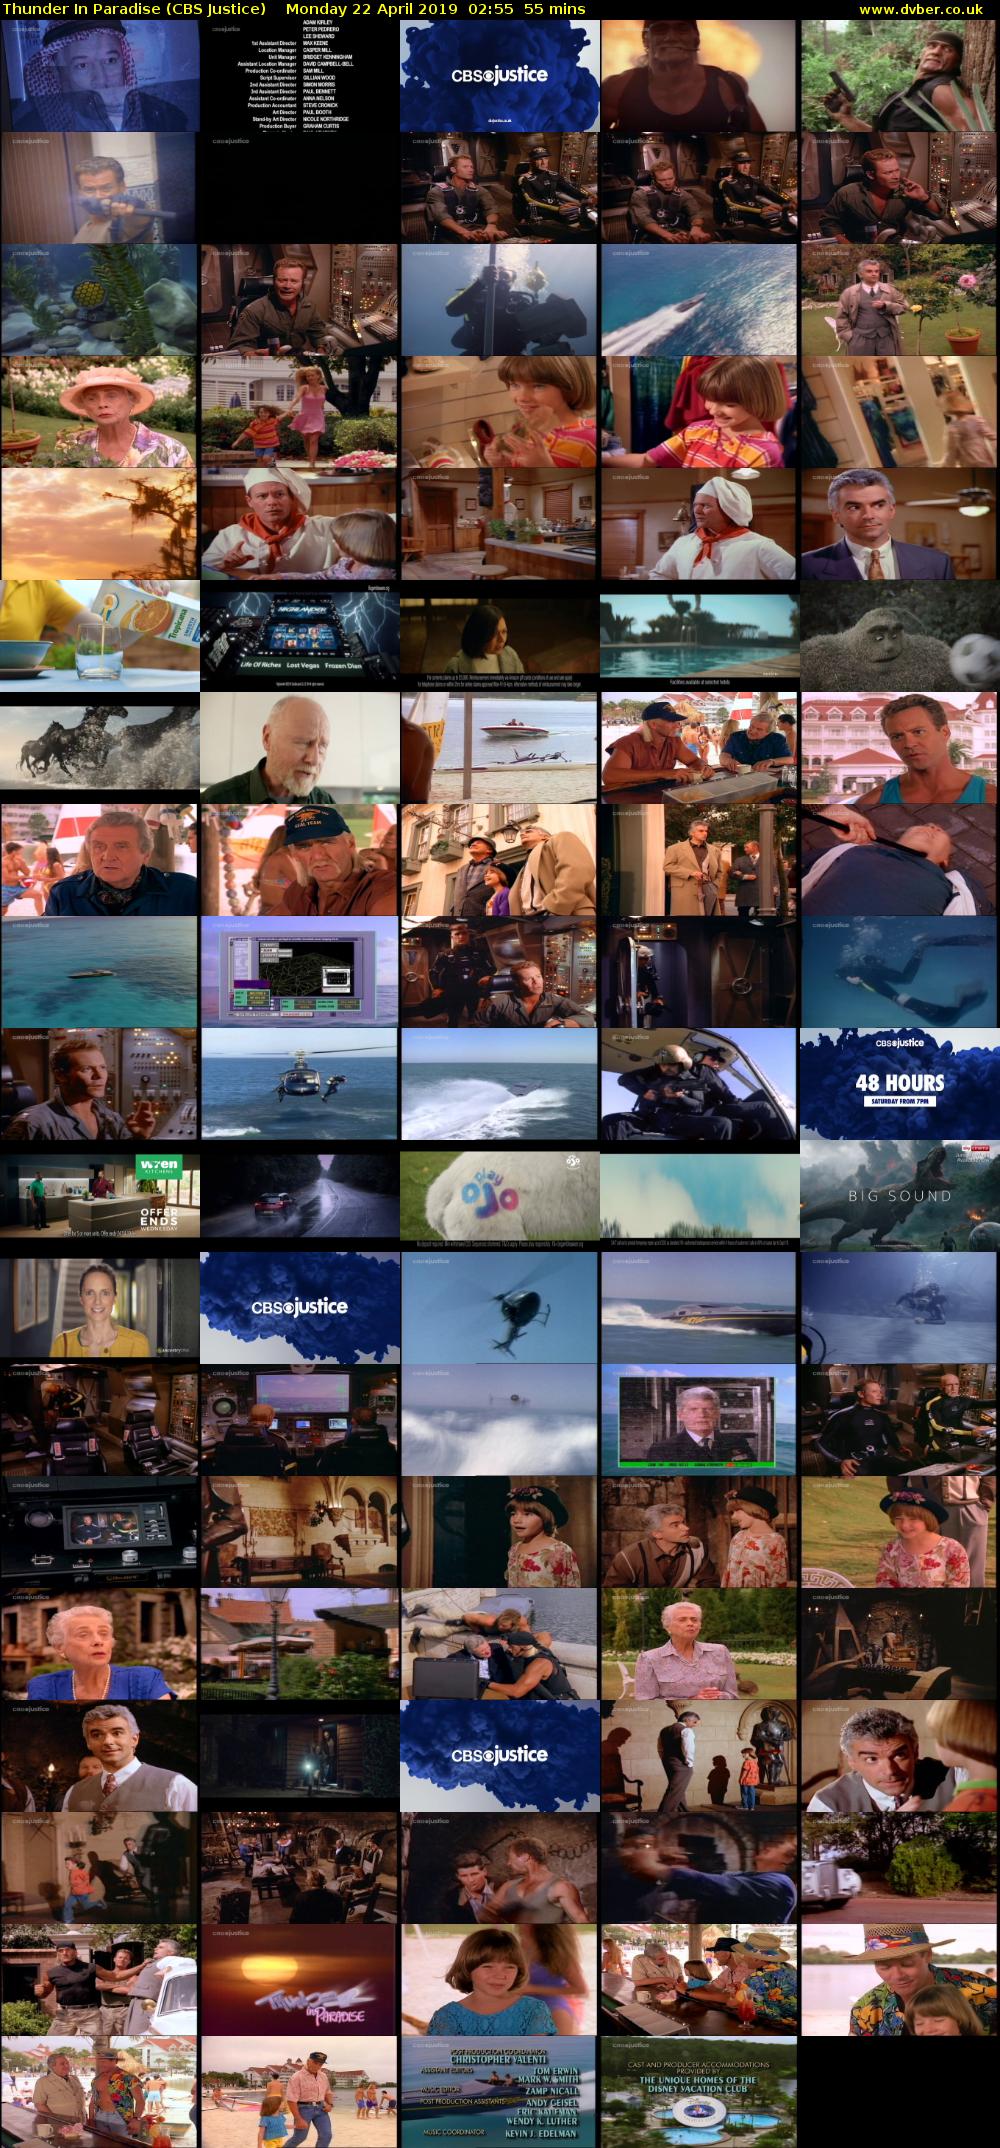 Thunder In Paradise (CBS Justice) Monday 22 April 2019 02:55 - 03:50